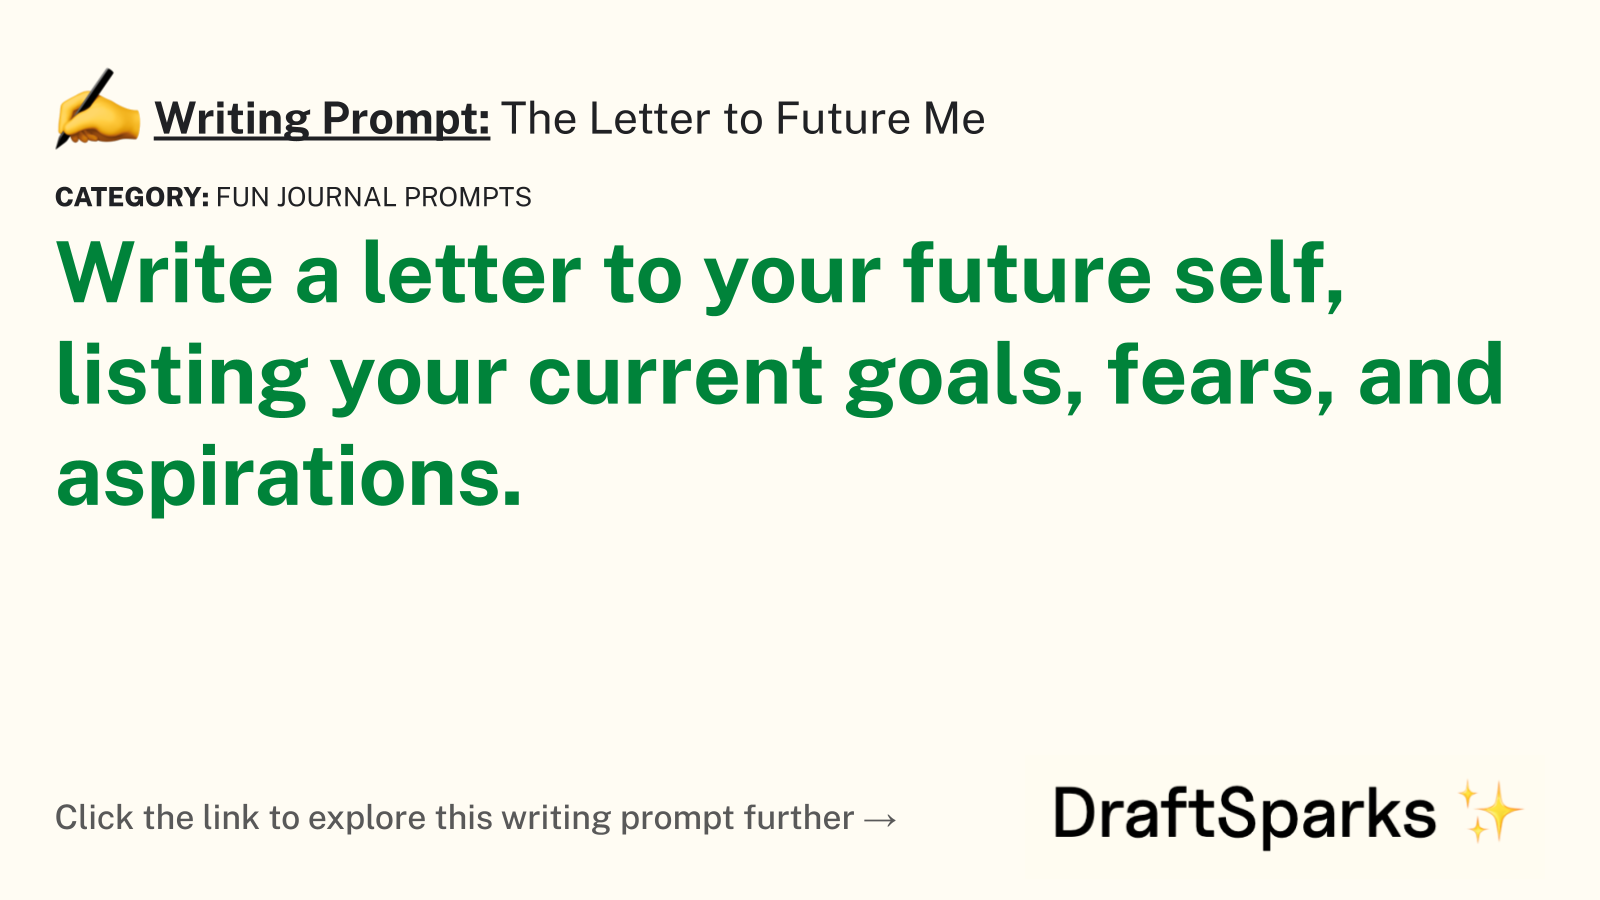 The Letter to Future Me